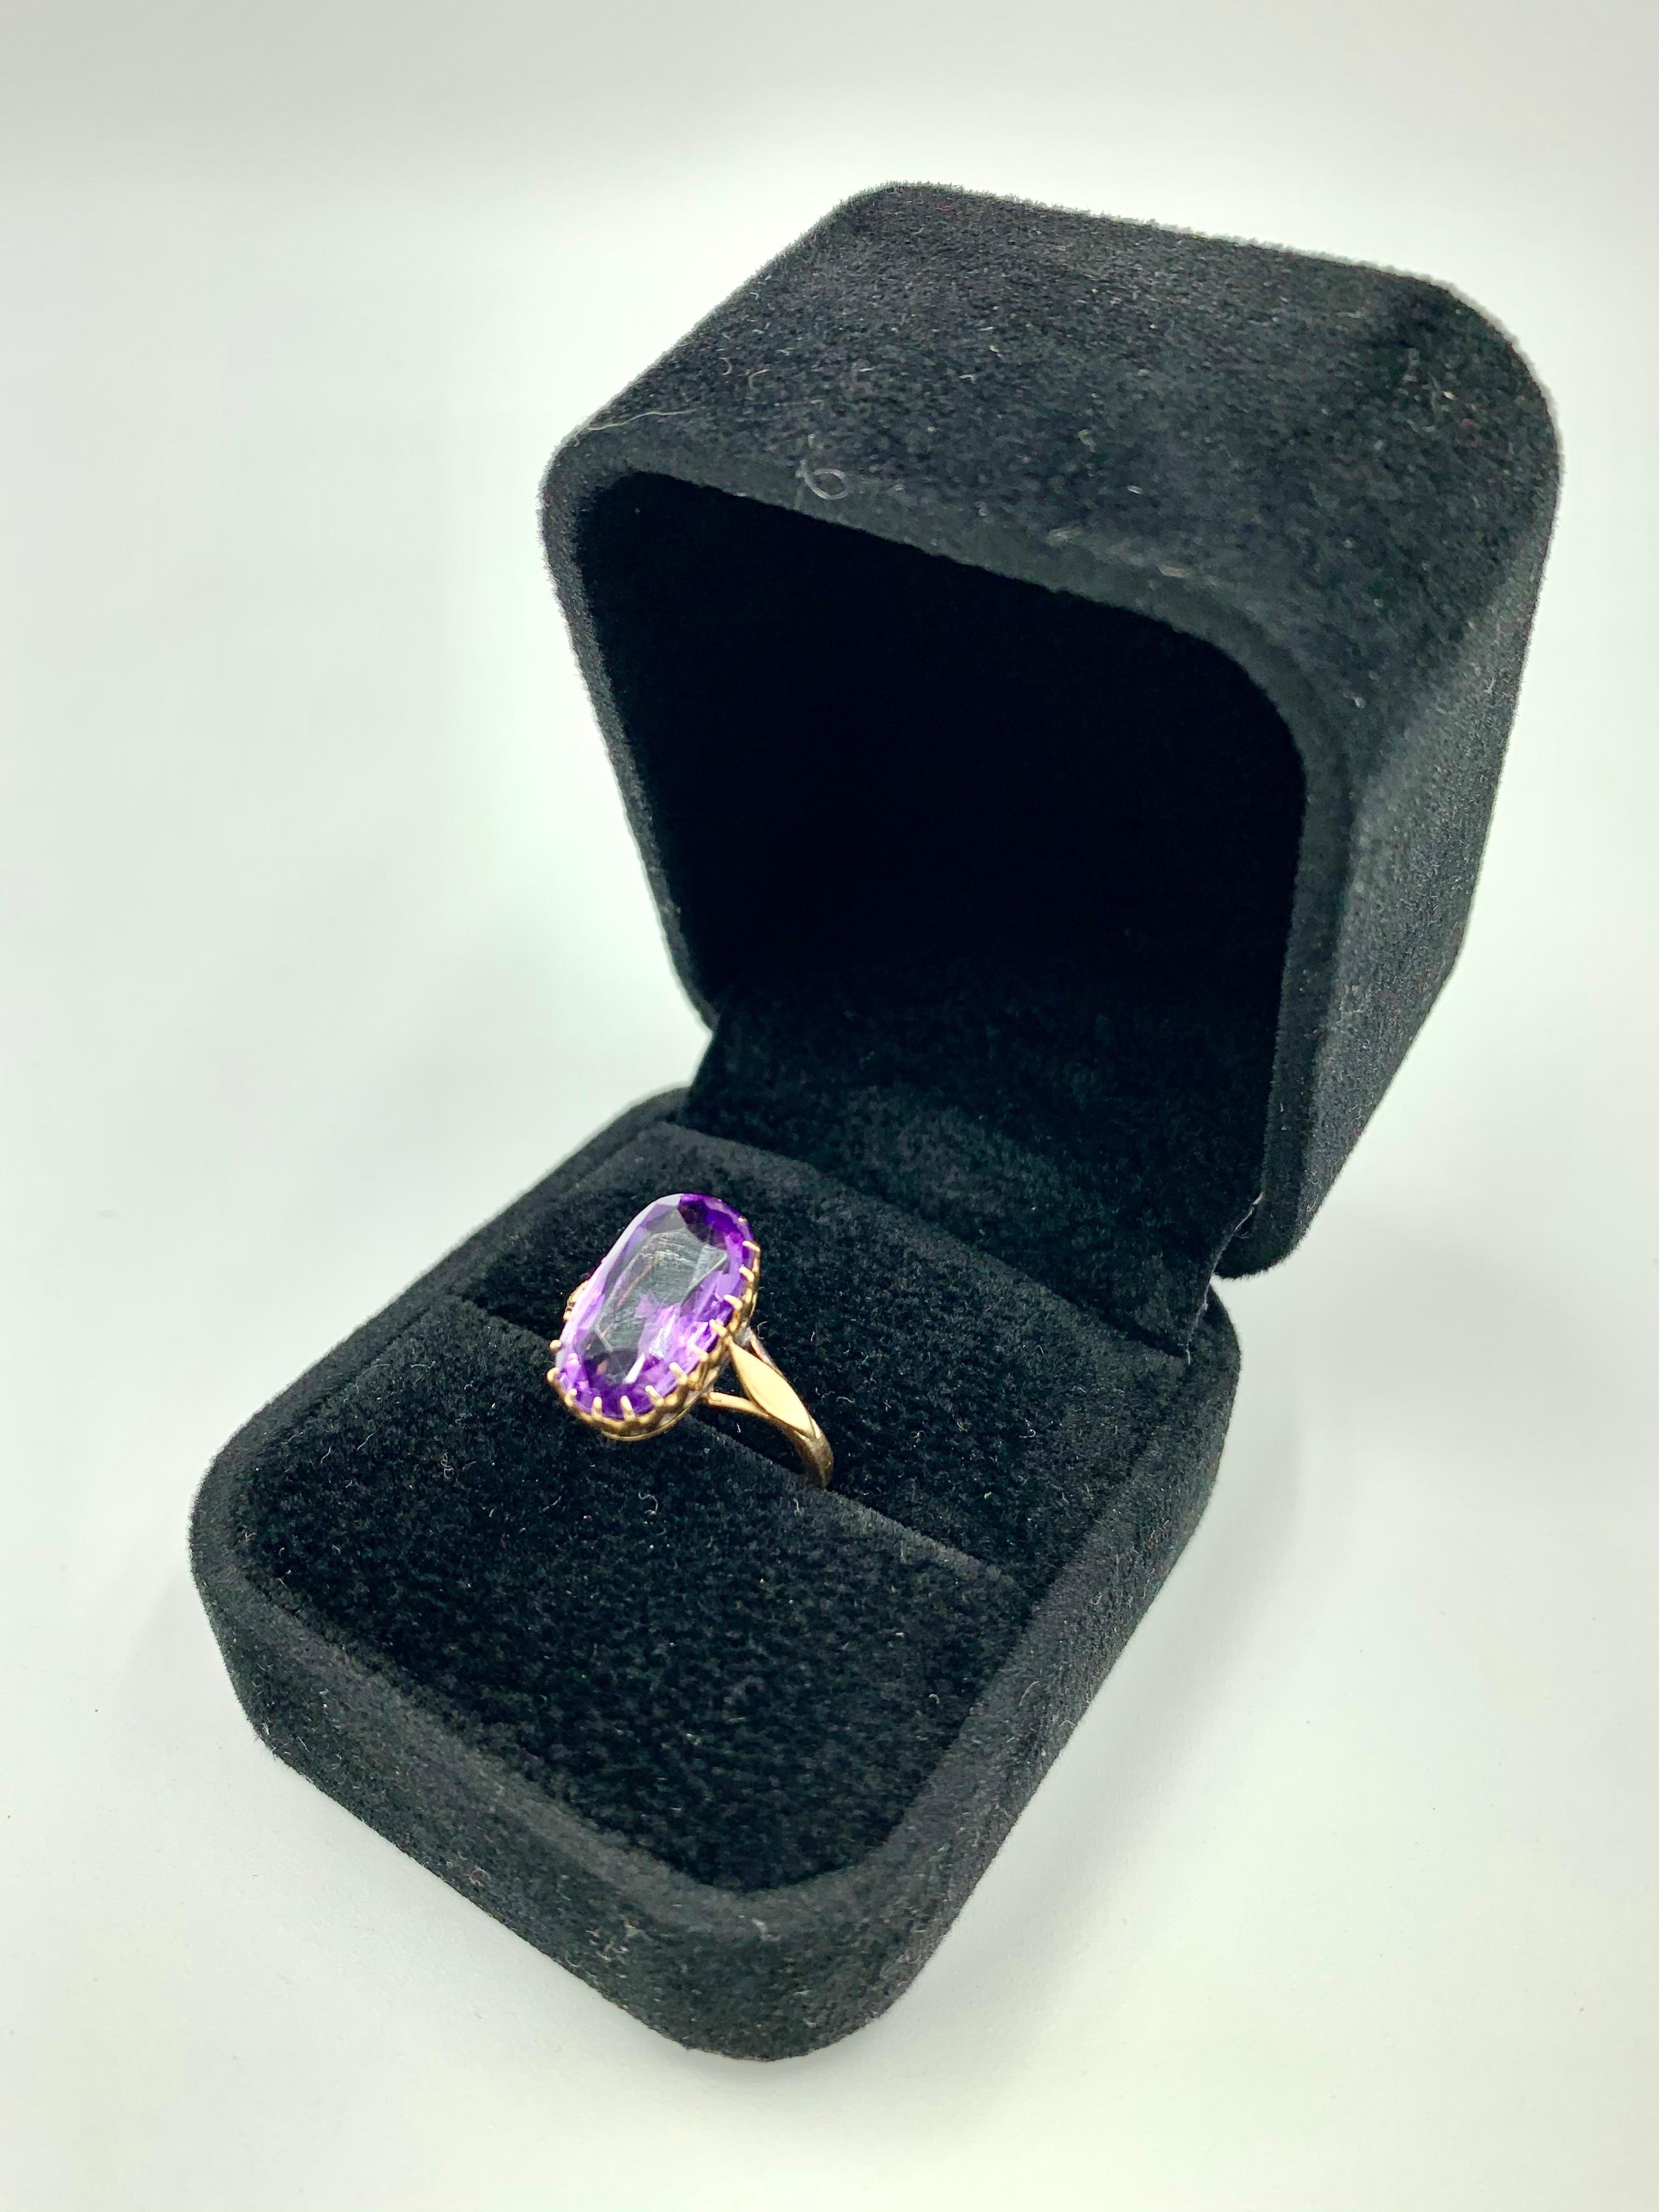 Romantic Antique Early Victorian 14 Karat Gold Yellow and Amethyst Oval Ring 19th Century